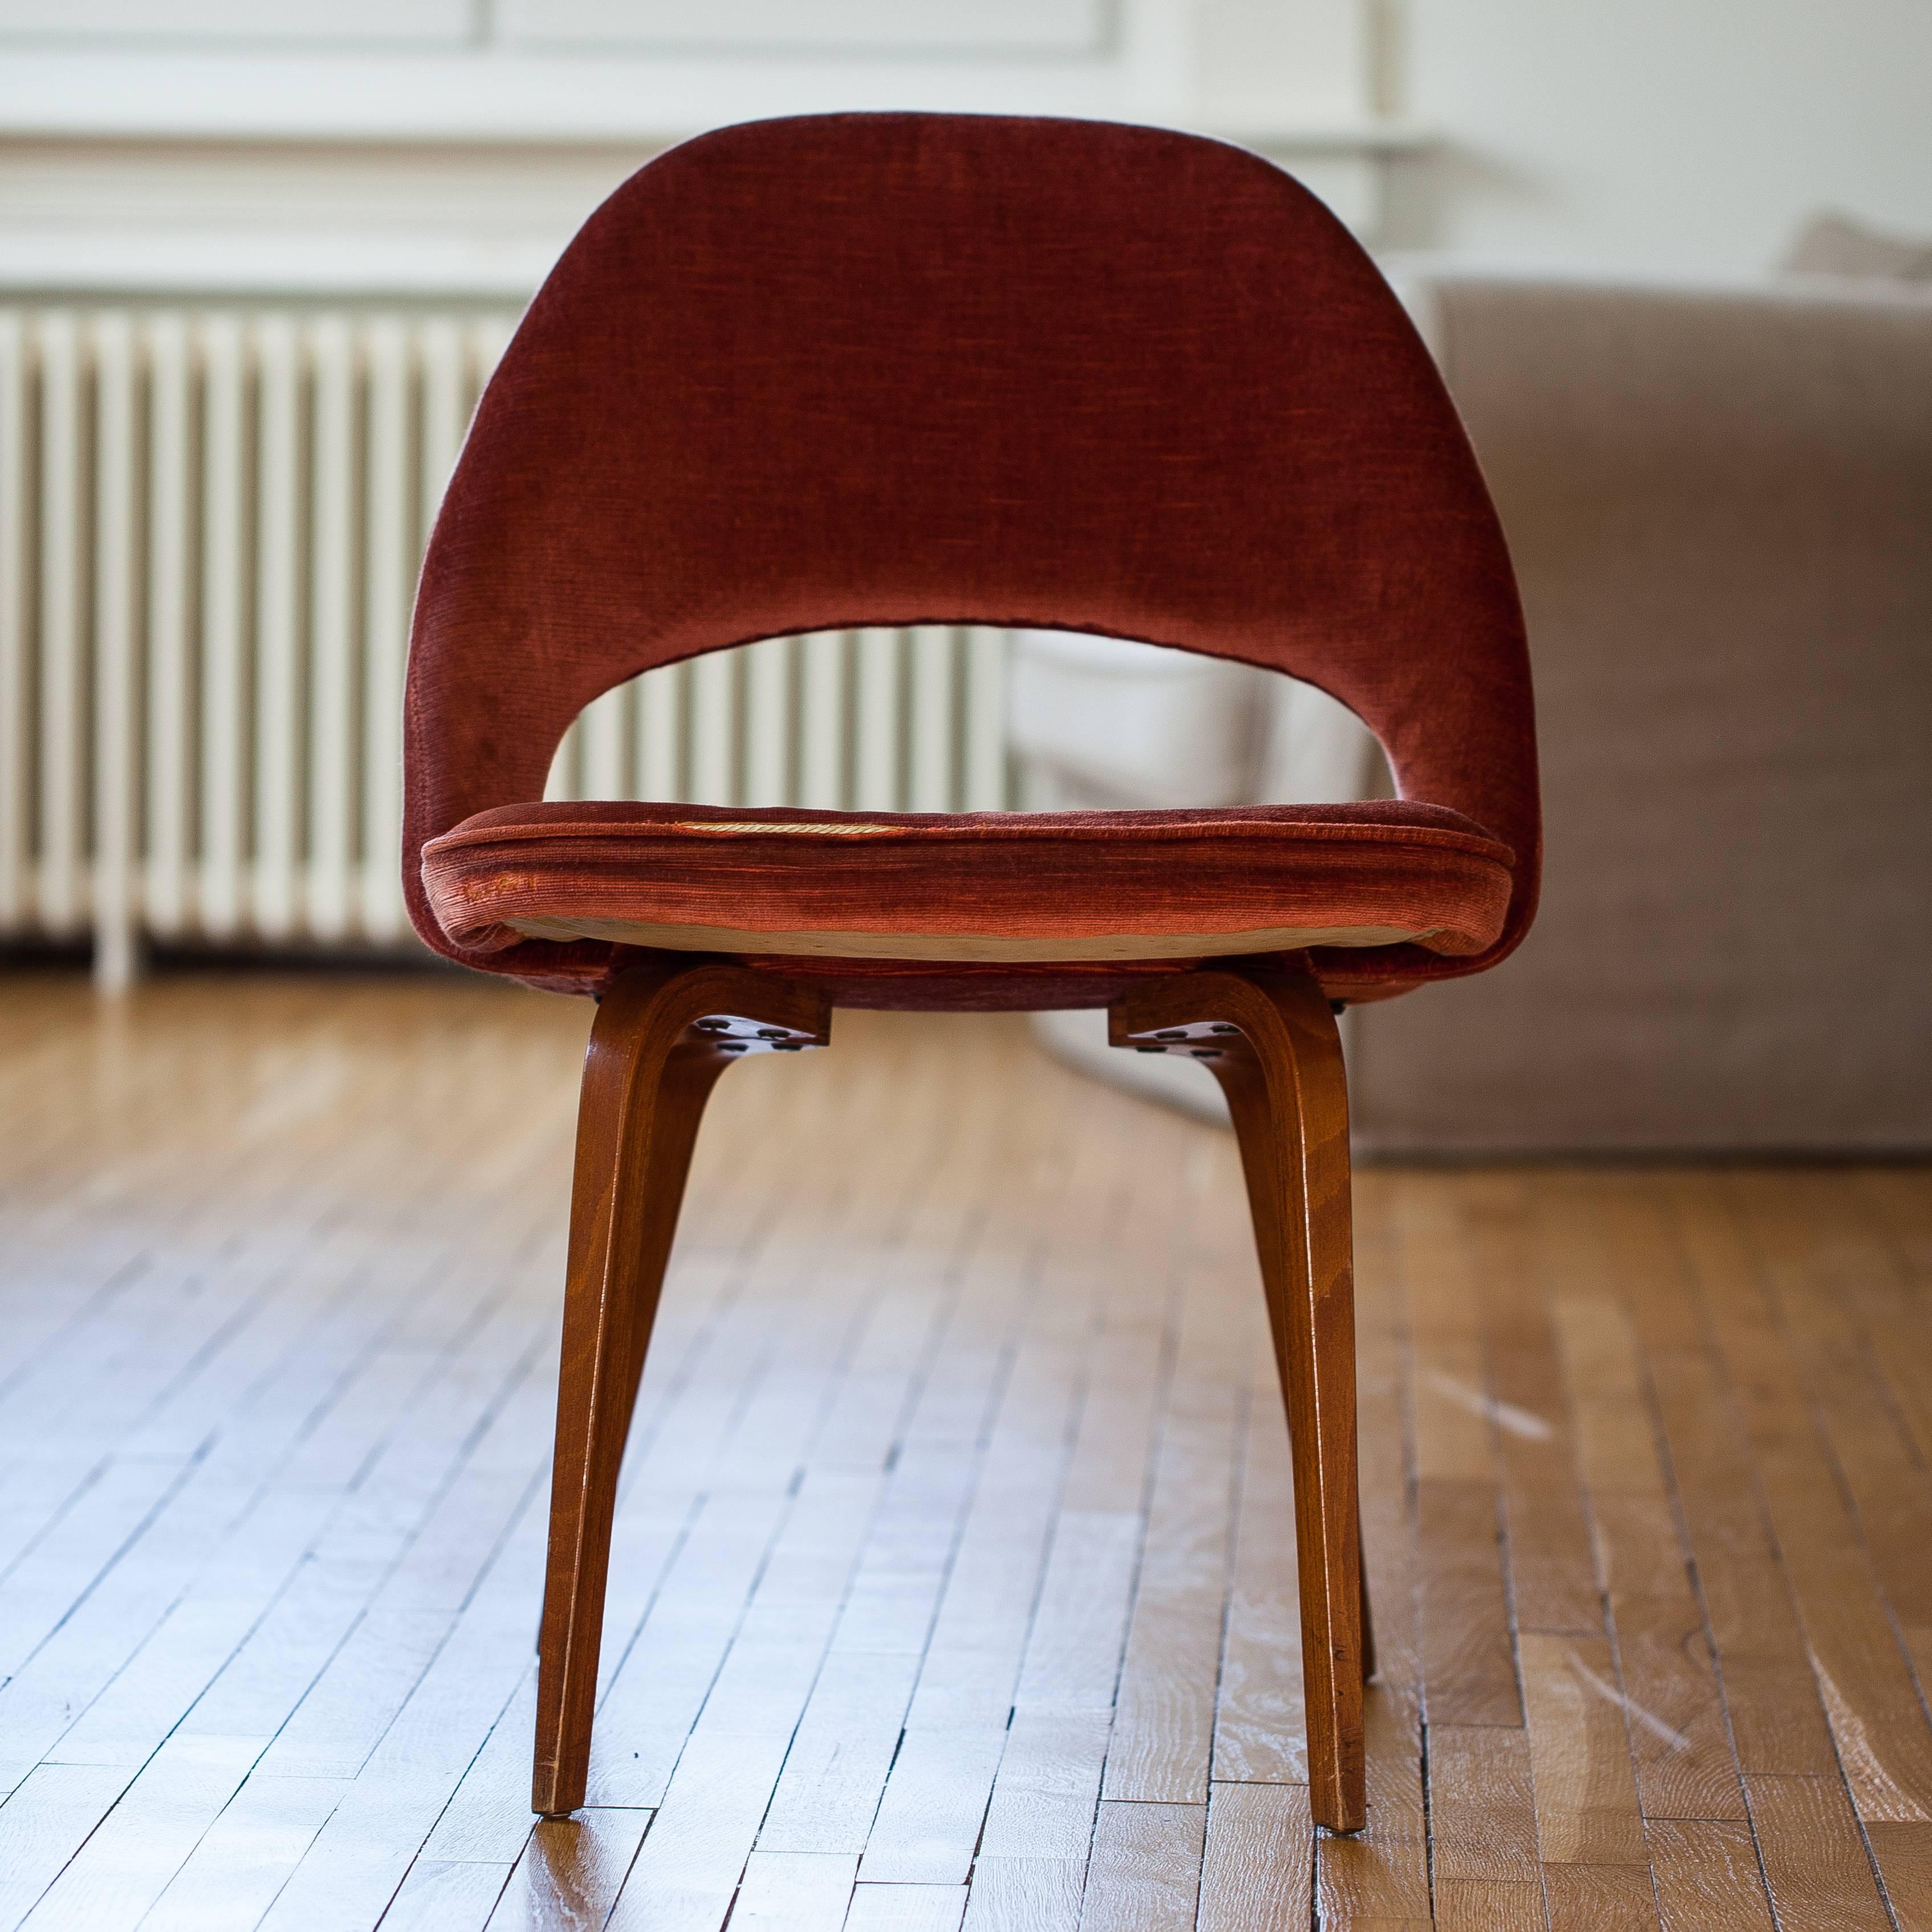 Very decorative seat in the style of Eero Saarinen, 1960s. This chair has walnut legs and is in original condition.